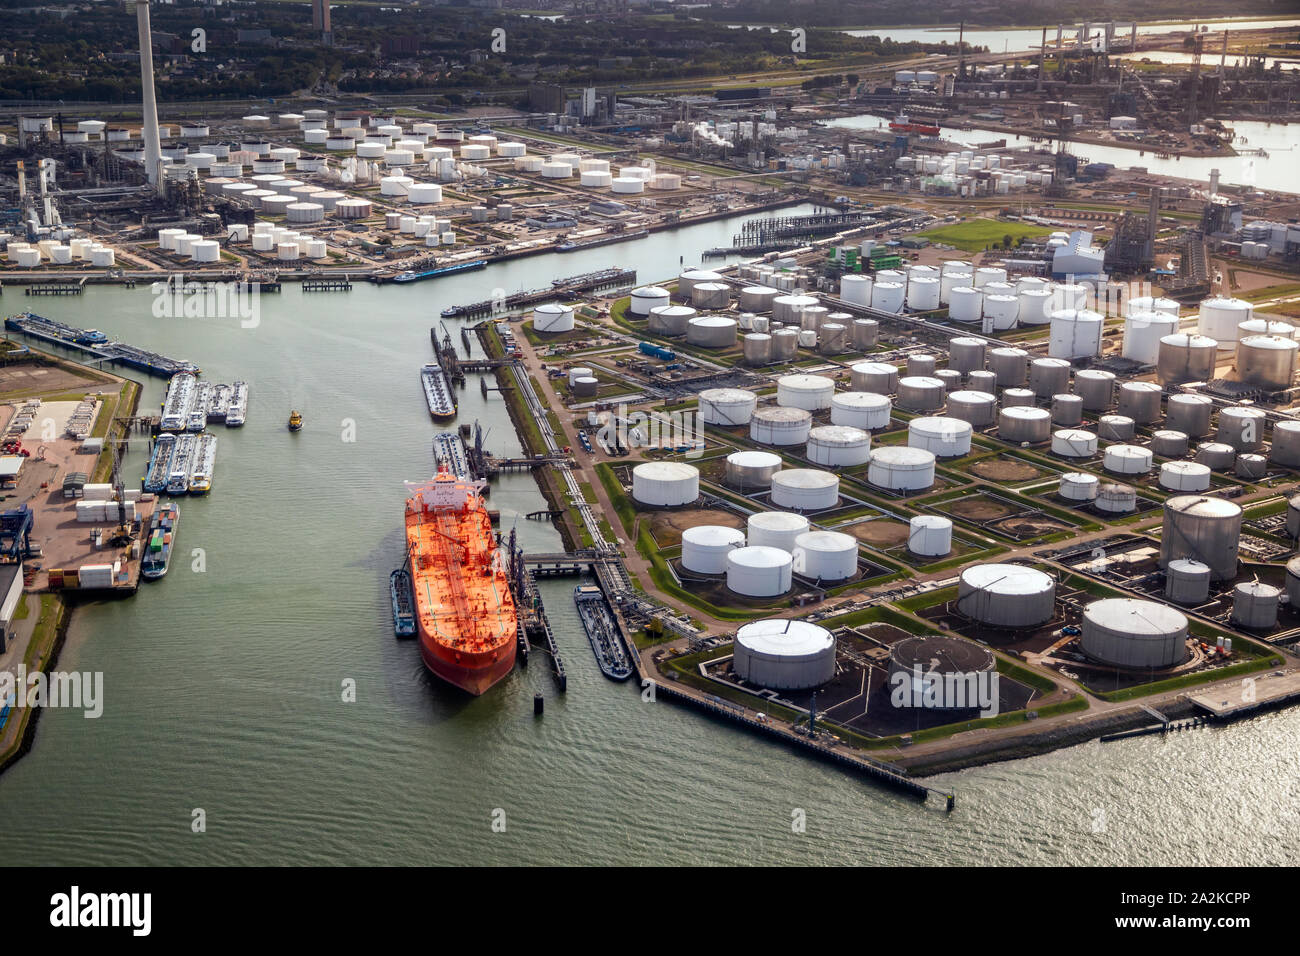 Aerial view of a large orange oil tanker moored at an oil storage silo terminal in an industrial port. Stock Photo